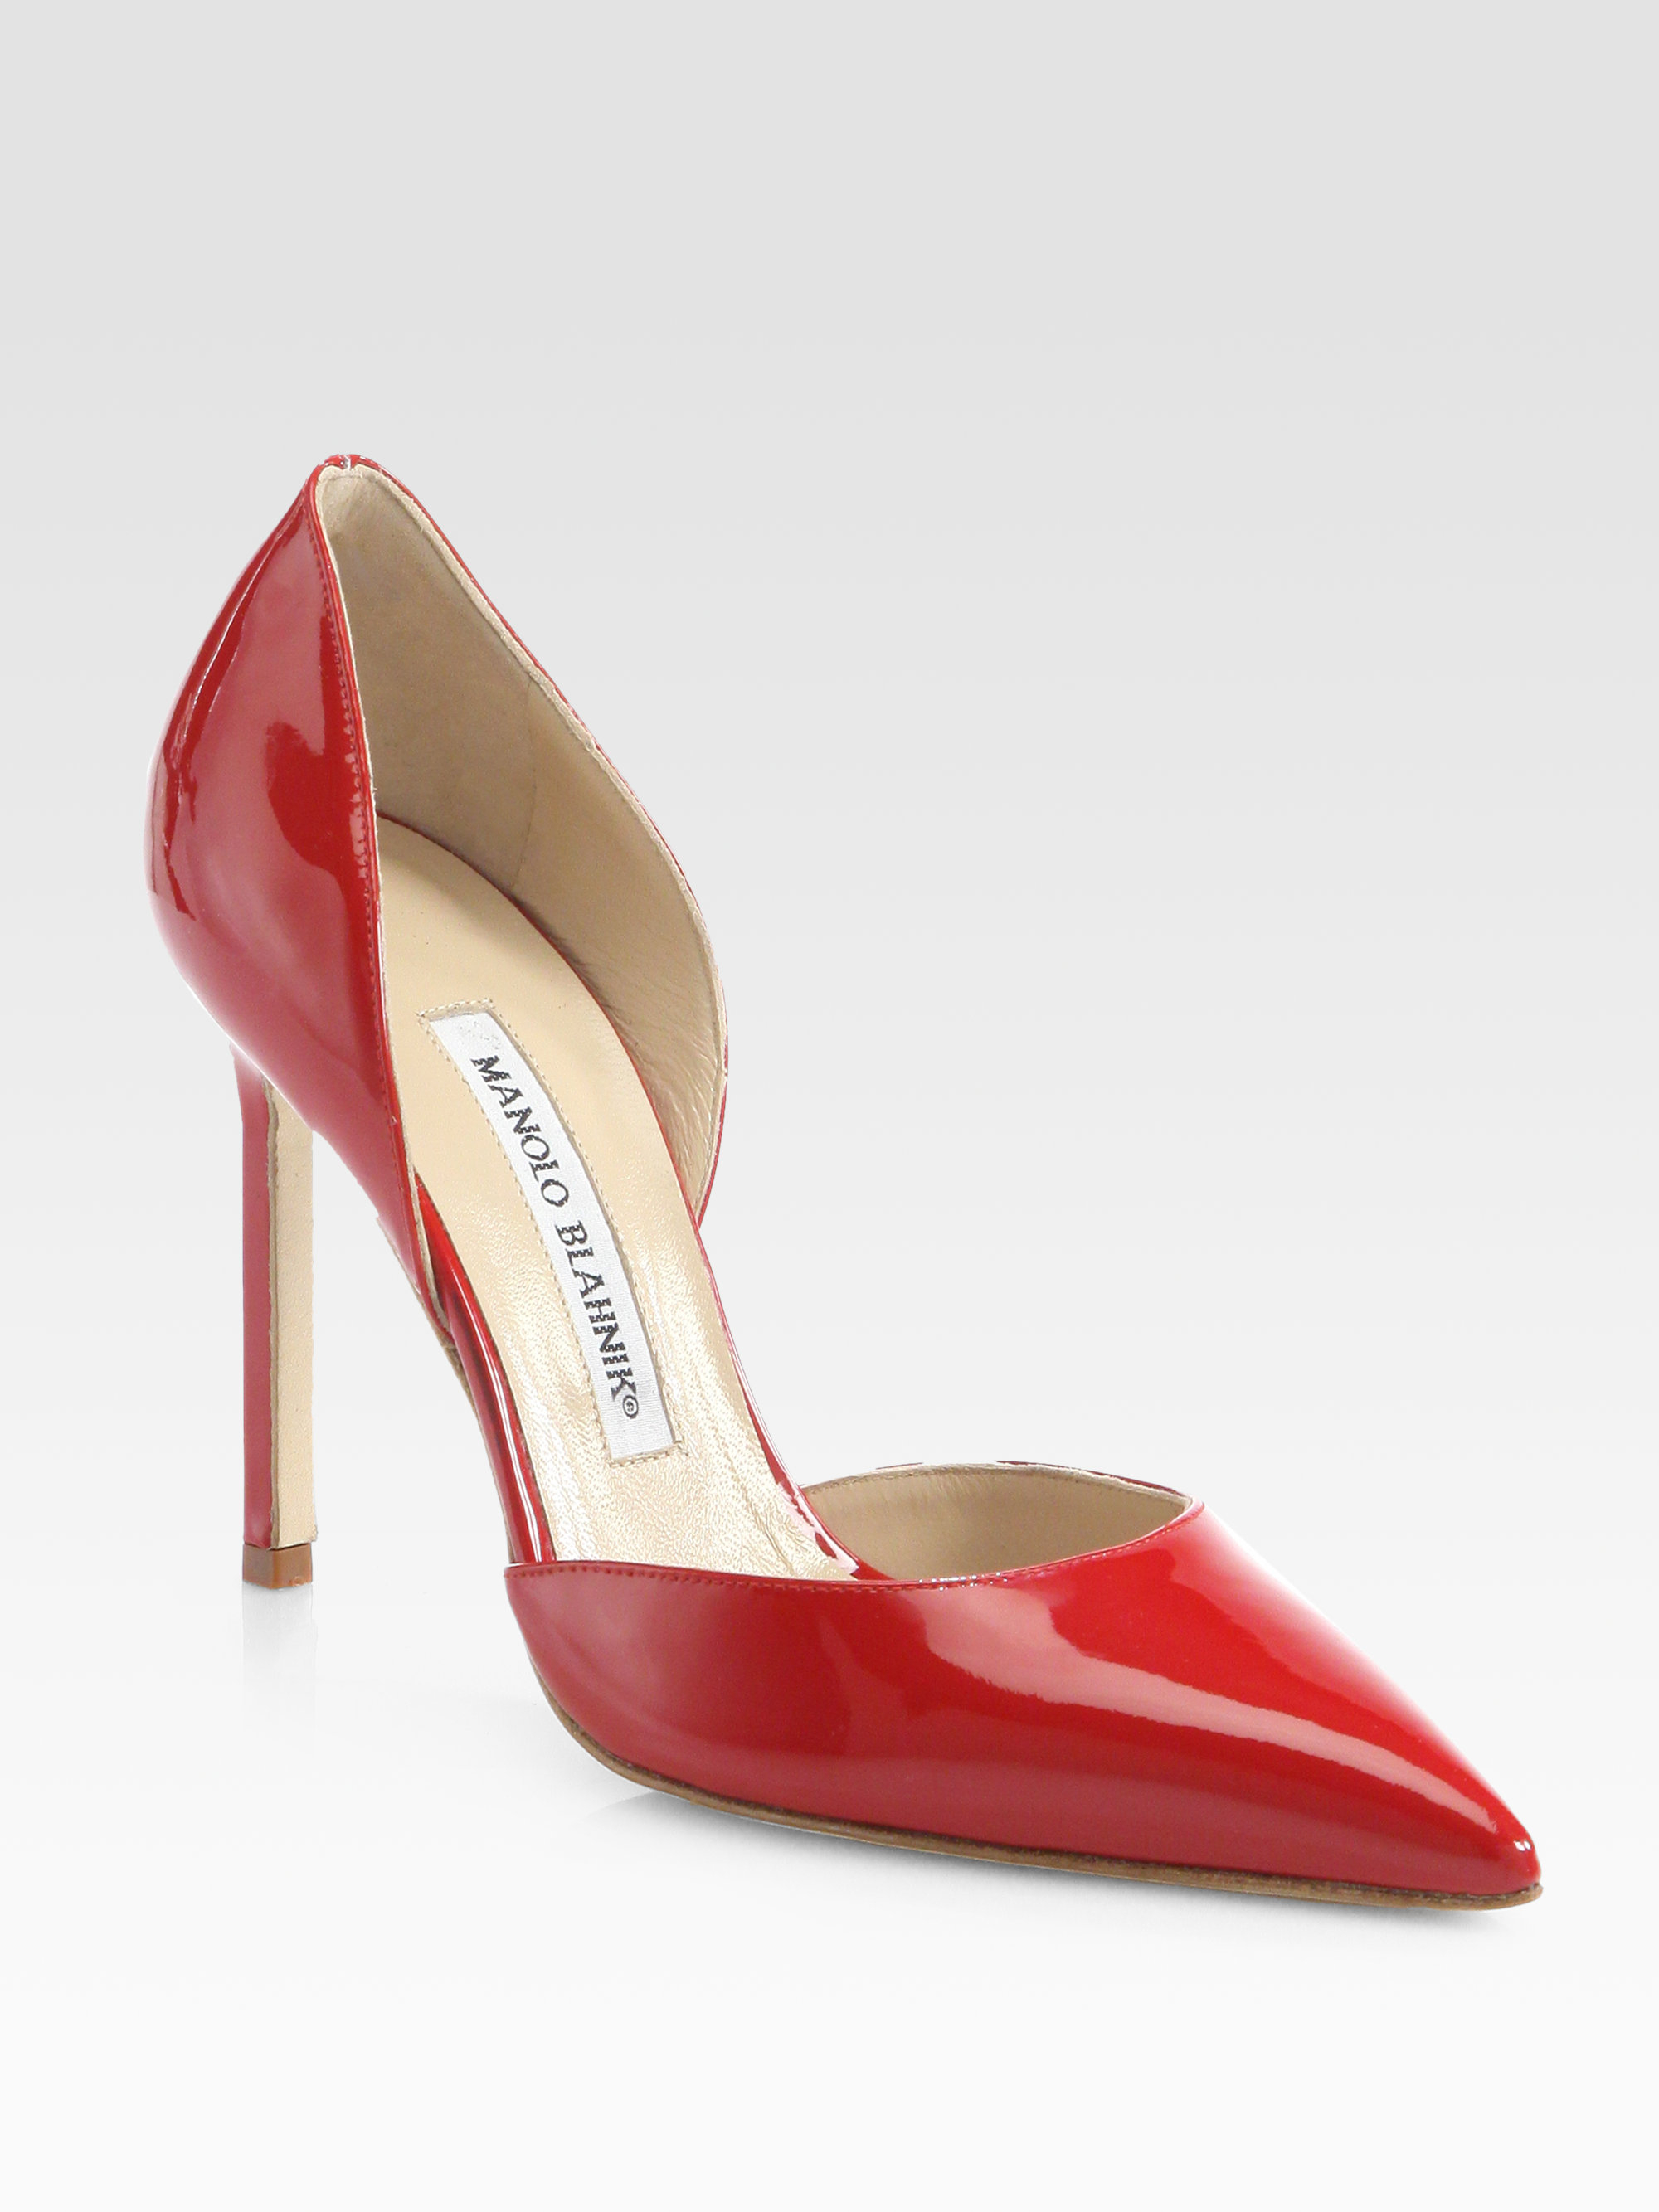 Manolo Blahnik Tayler Patent Leather D'orsay Pumps in Red | Lyst